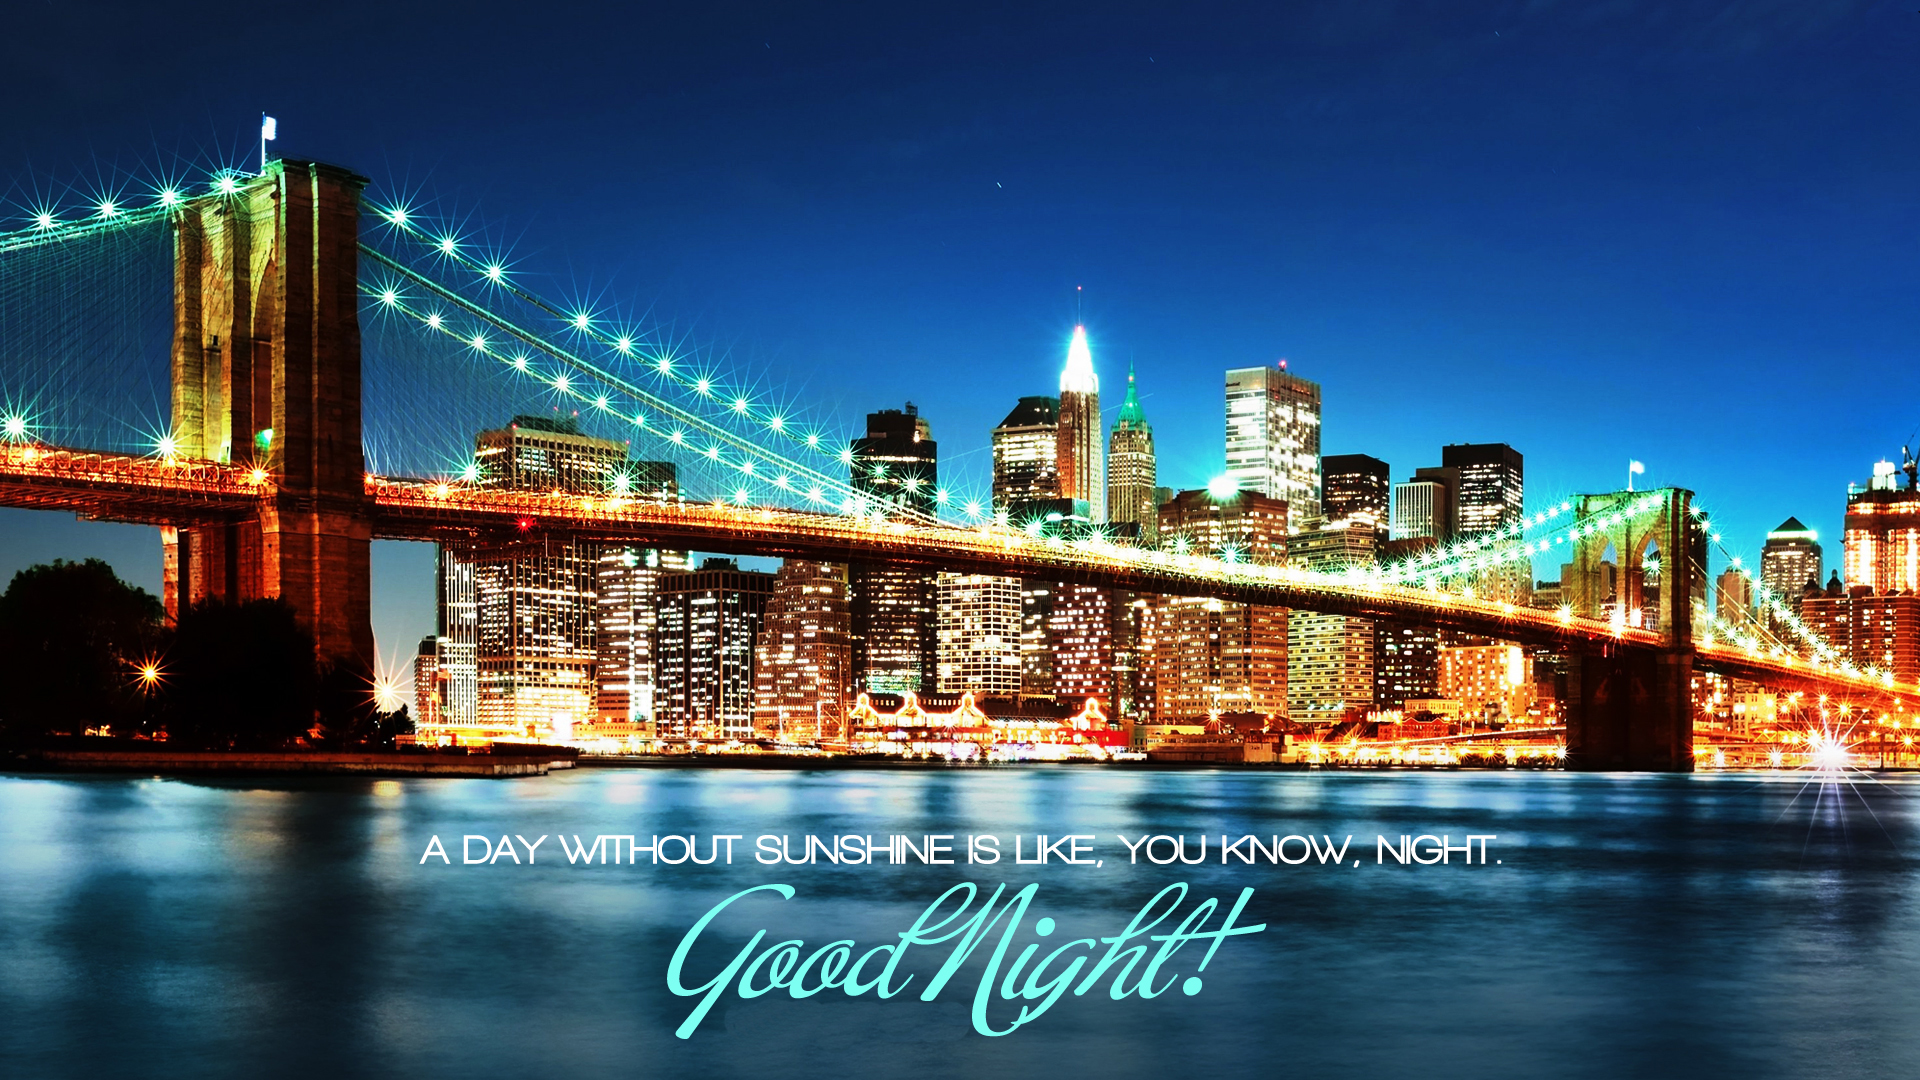 Good Night Nice Wide Wallpapers And Backgrounds - Brooklyn Bridge - HD Wallpaper 